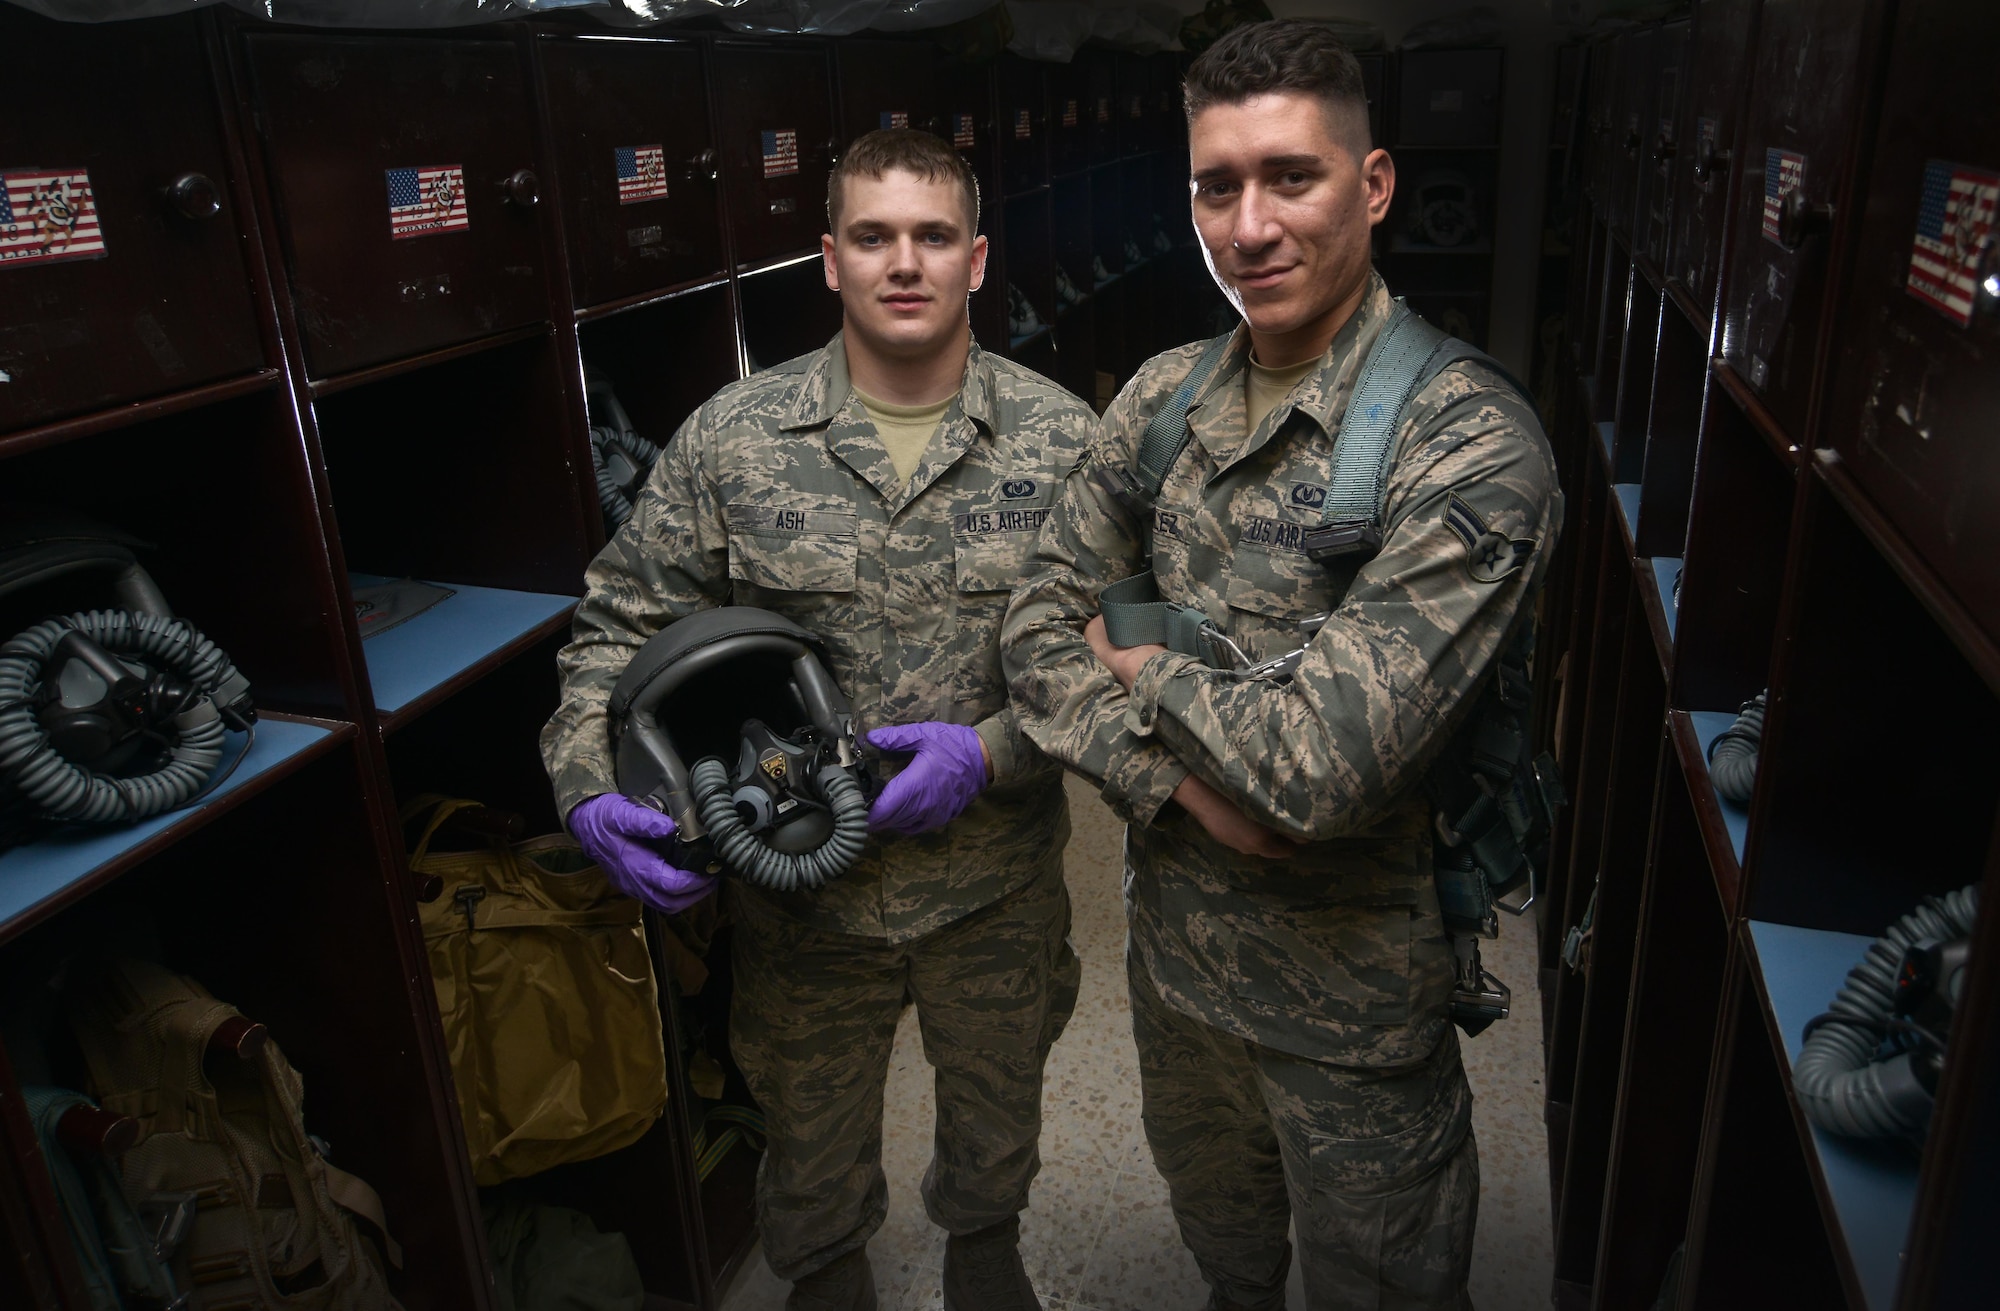 Senior Airman James Ash and Airman 1st Class Andrew Gonzalez are deployed to the 379th Expeditionary Operations Support Squadron Aircrew Flight Equipment shop from Ellsworth Air Force Base, South Dakota. Several airmen deploy with their squadron or unit to Al Udeid Air Base under the air expeditionary force structure helping standardization throughout deployment cycles. (U.S. Air Force photo/Staff Sgt. Alexandre Montes)